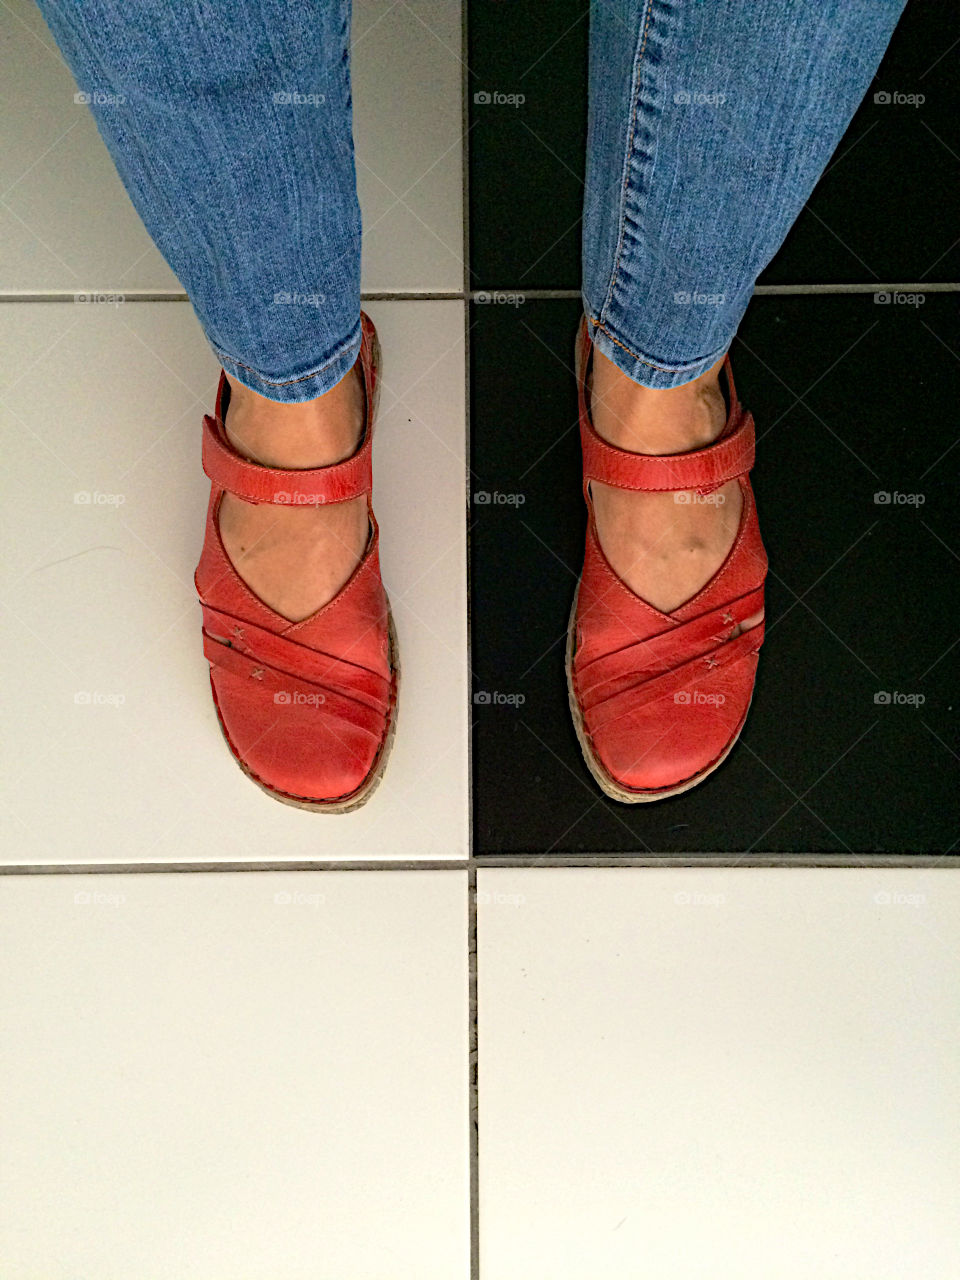 Standing with red shoes on black and white tiles